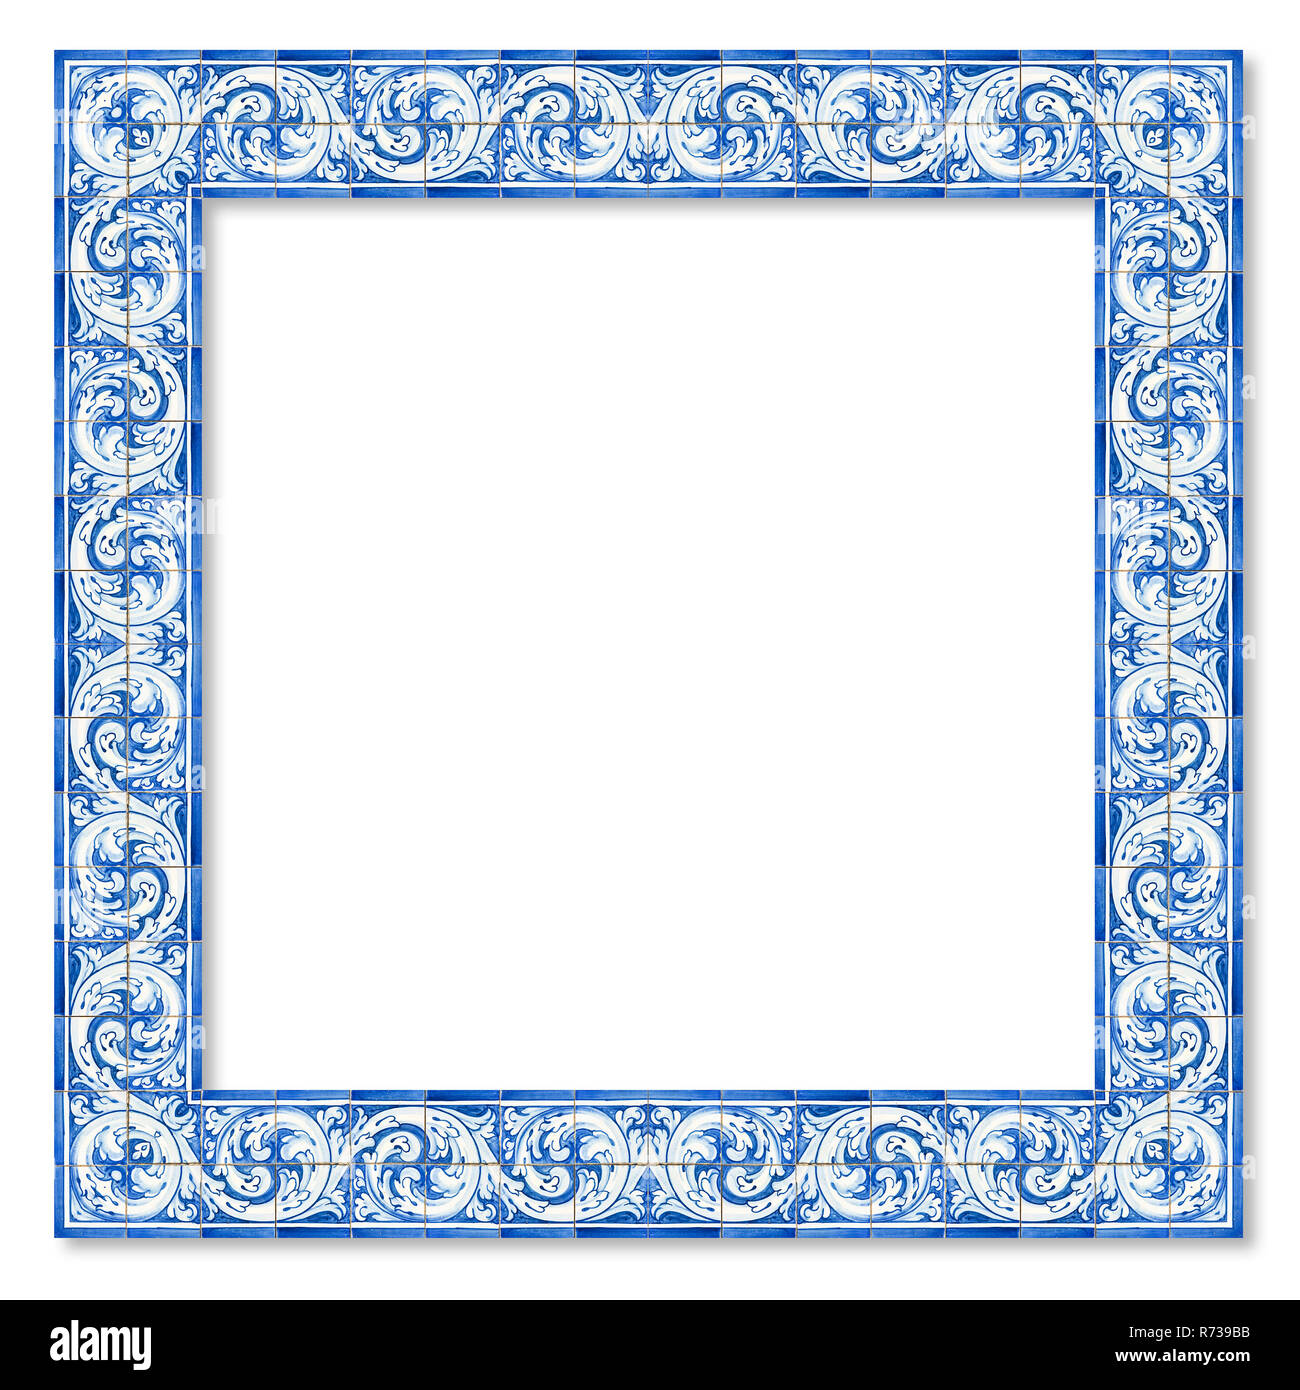 Frame design with typical portuguese decorations with colored ceramic tiles called 'azulejos' - high resolution image on white background for easy sel Stock Photo